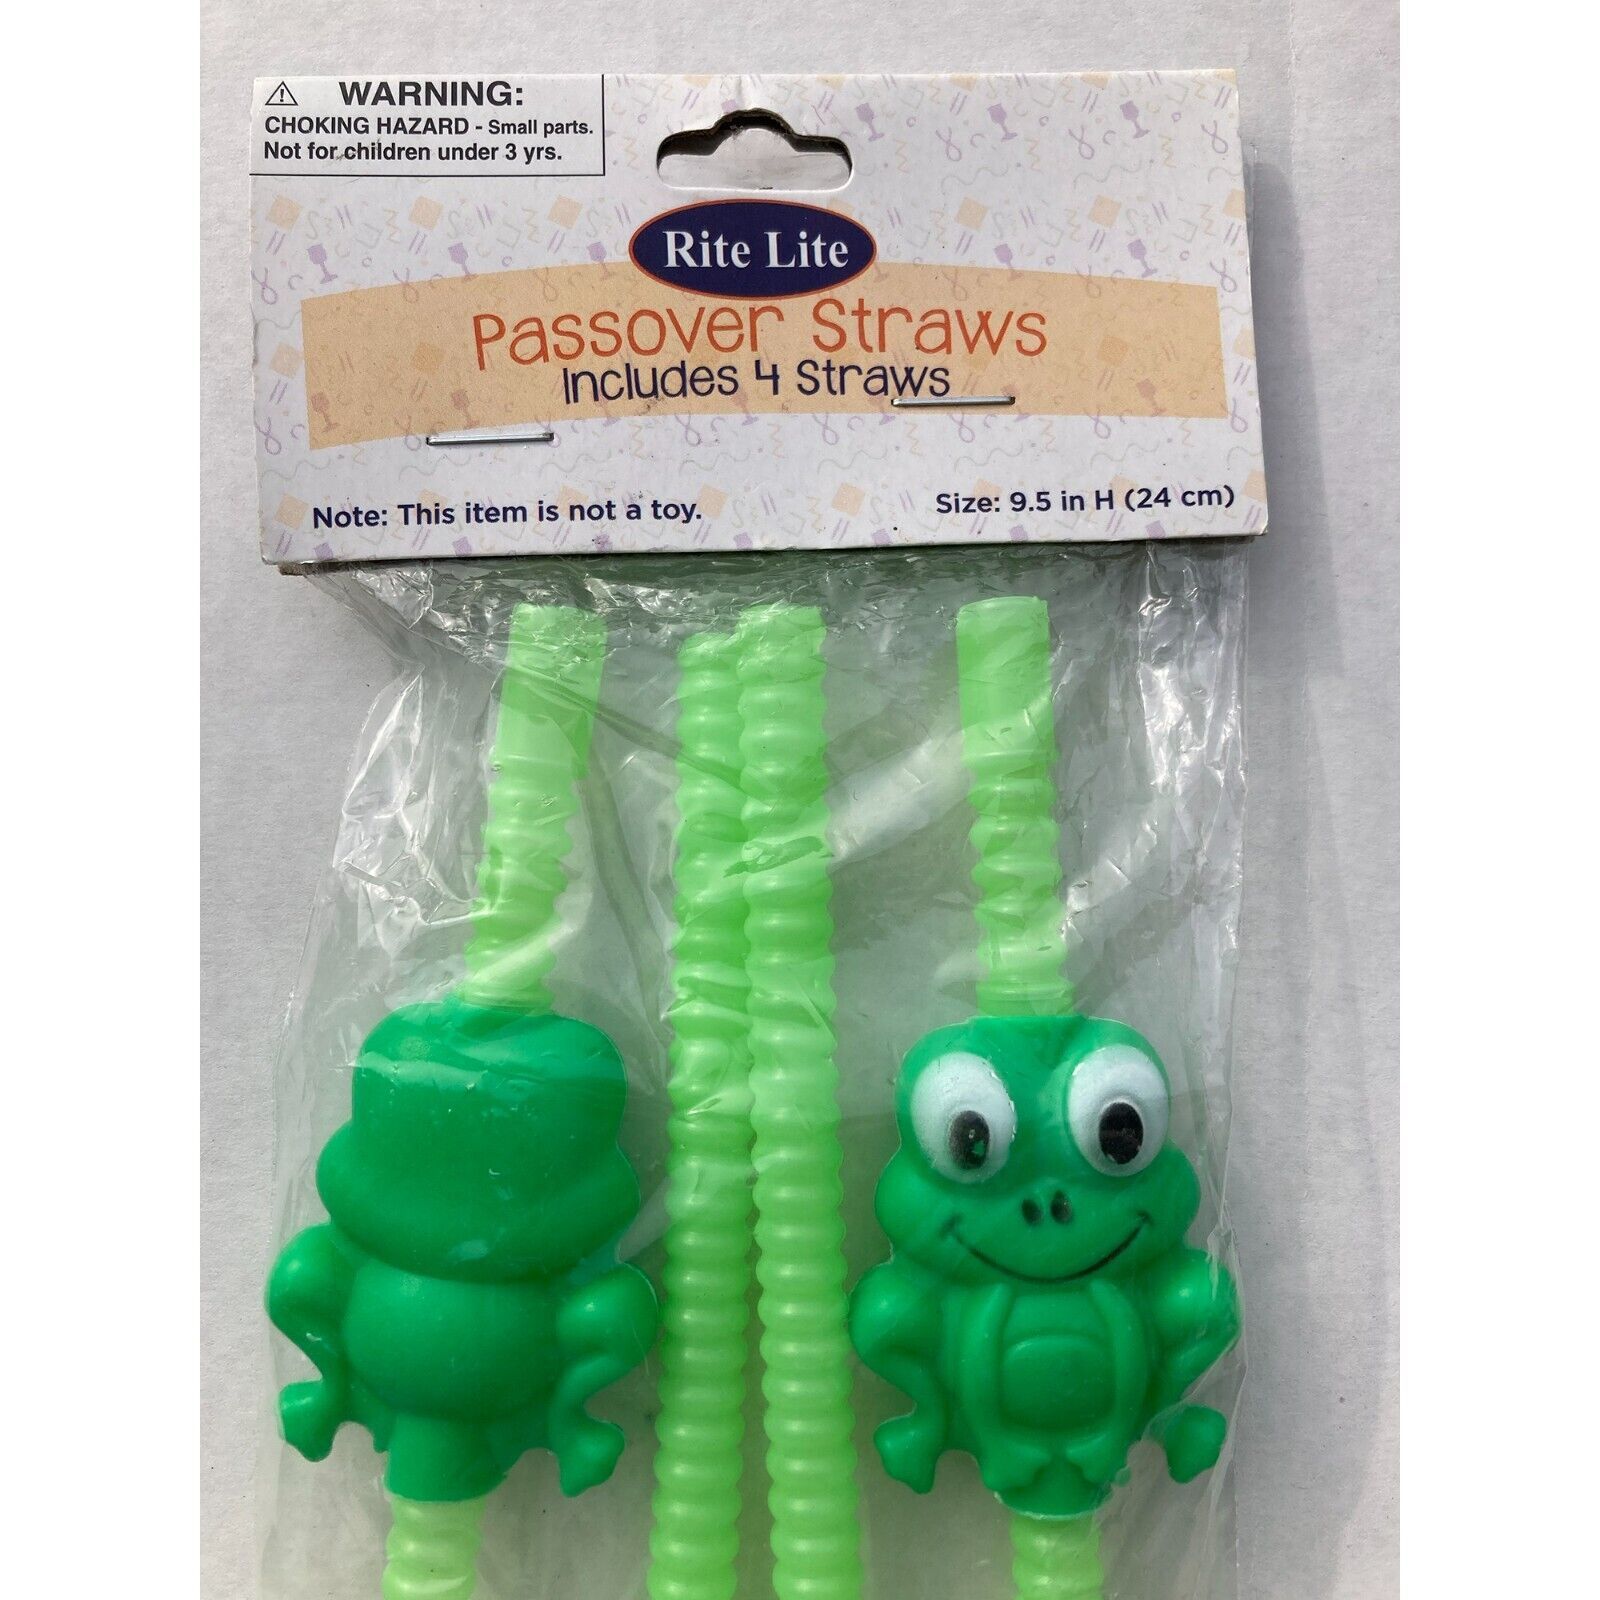 Primary image for Rite Lite Passover Straws 4 Straws Size 9.5 in H Green Plastic Party Kids Decor